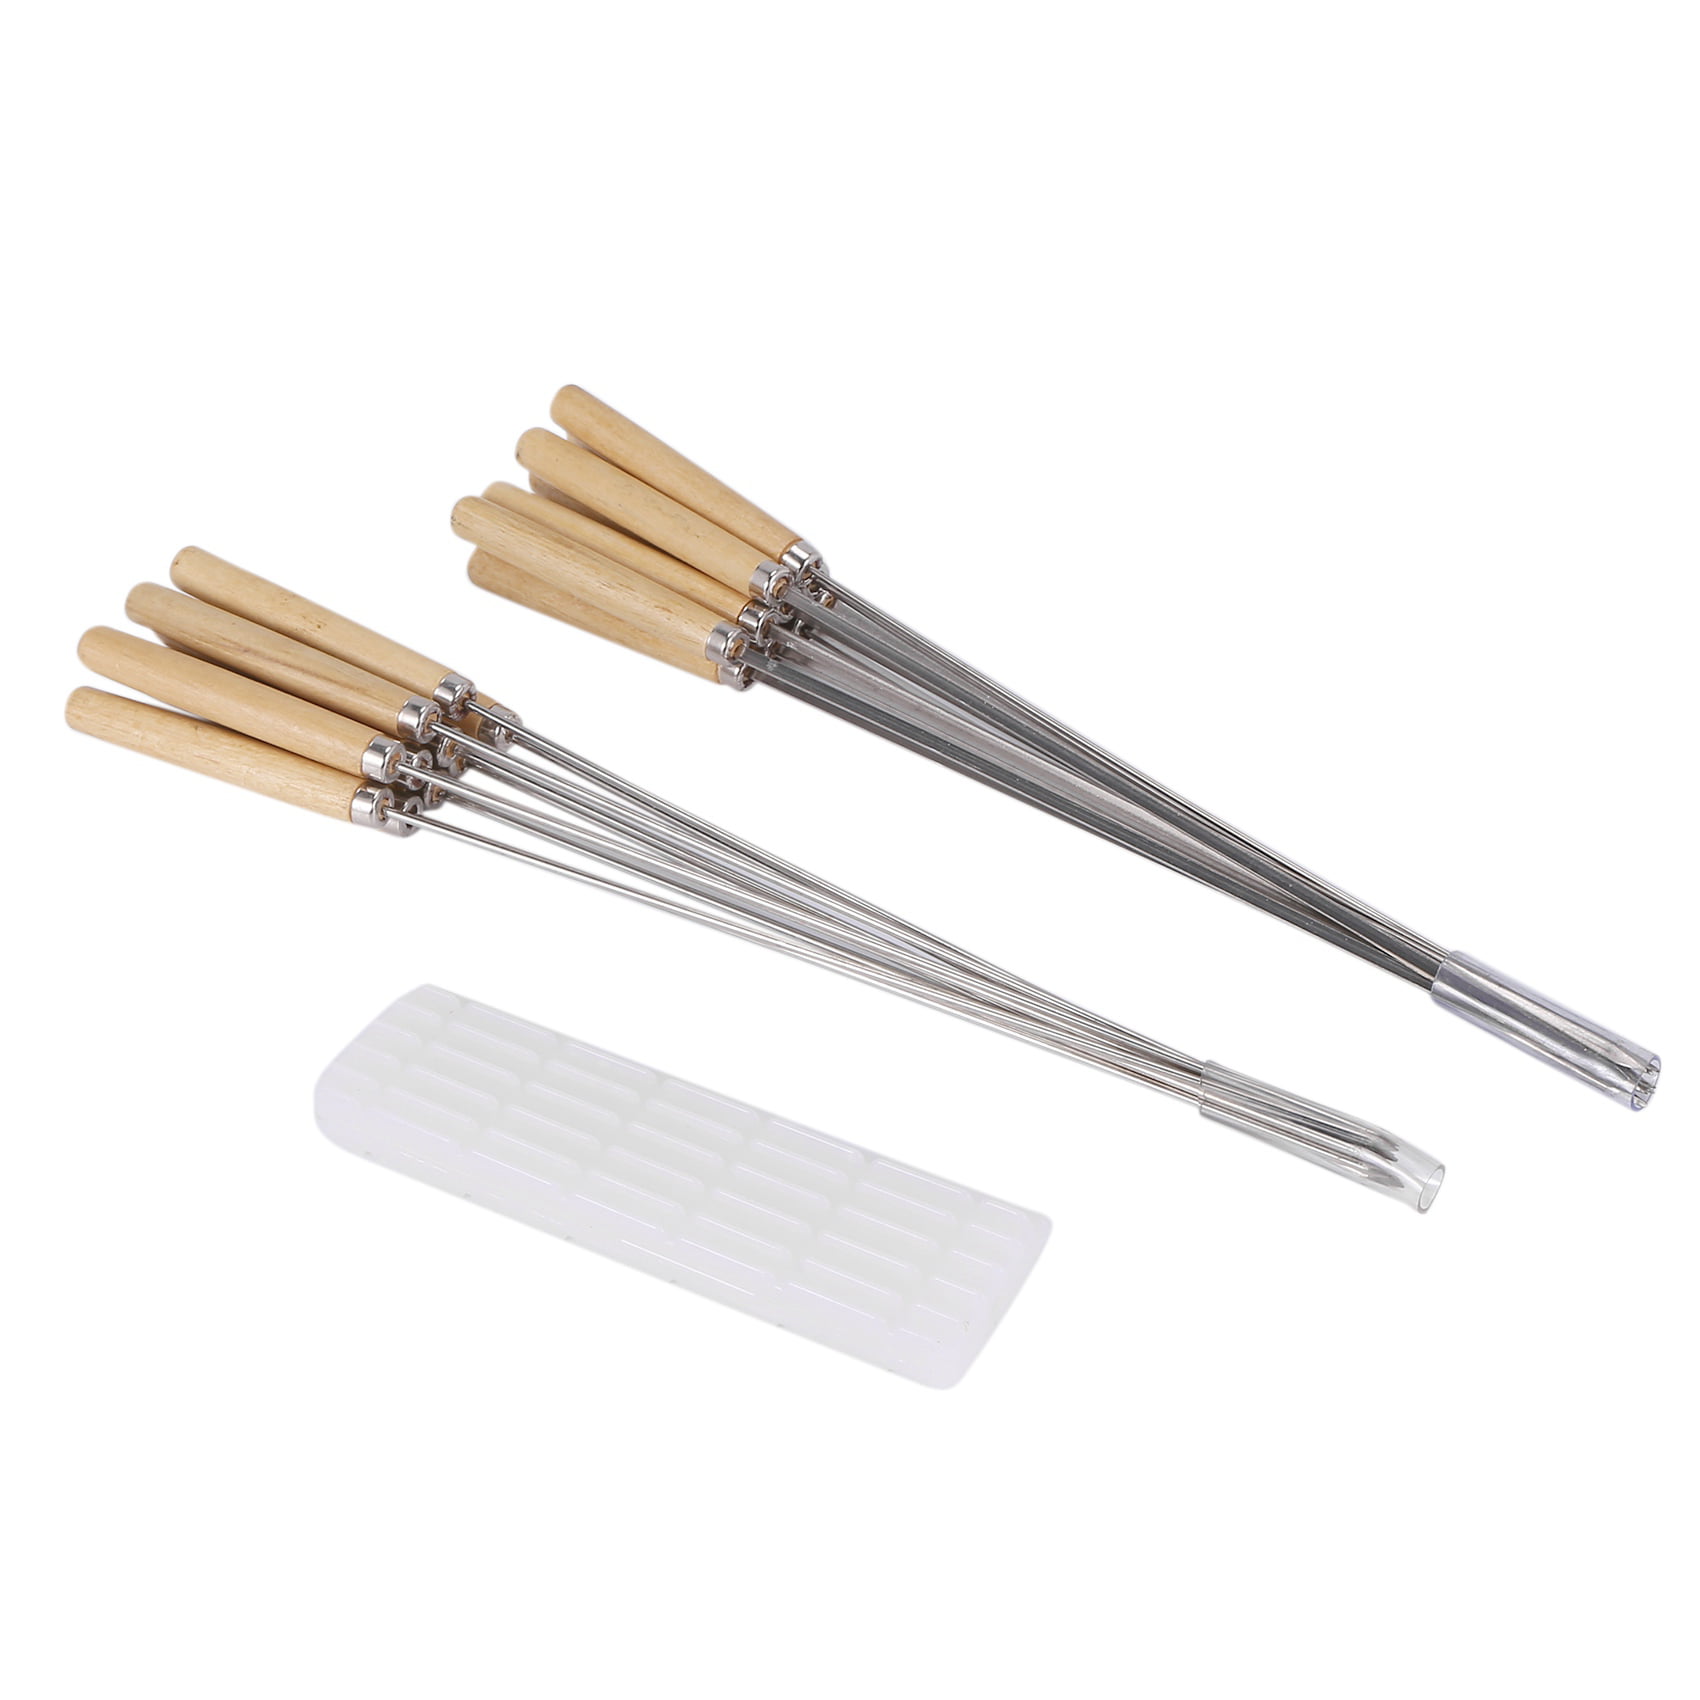 20PCS BBQ Skewers Stainless Steel Long Size Durable Metal Sticks for Barbecue 